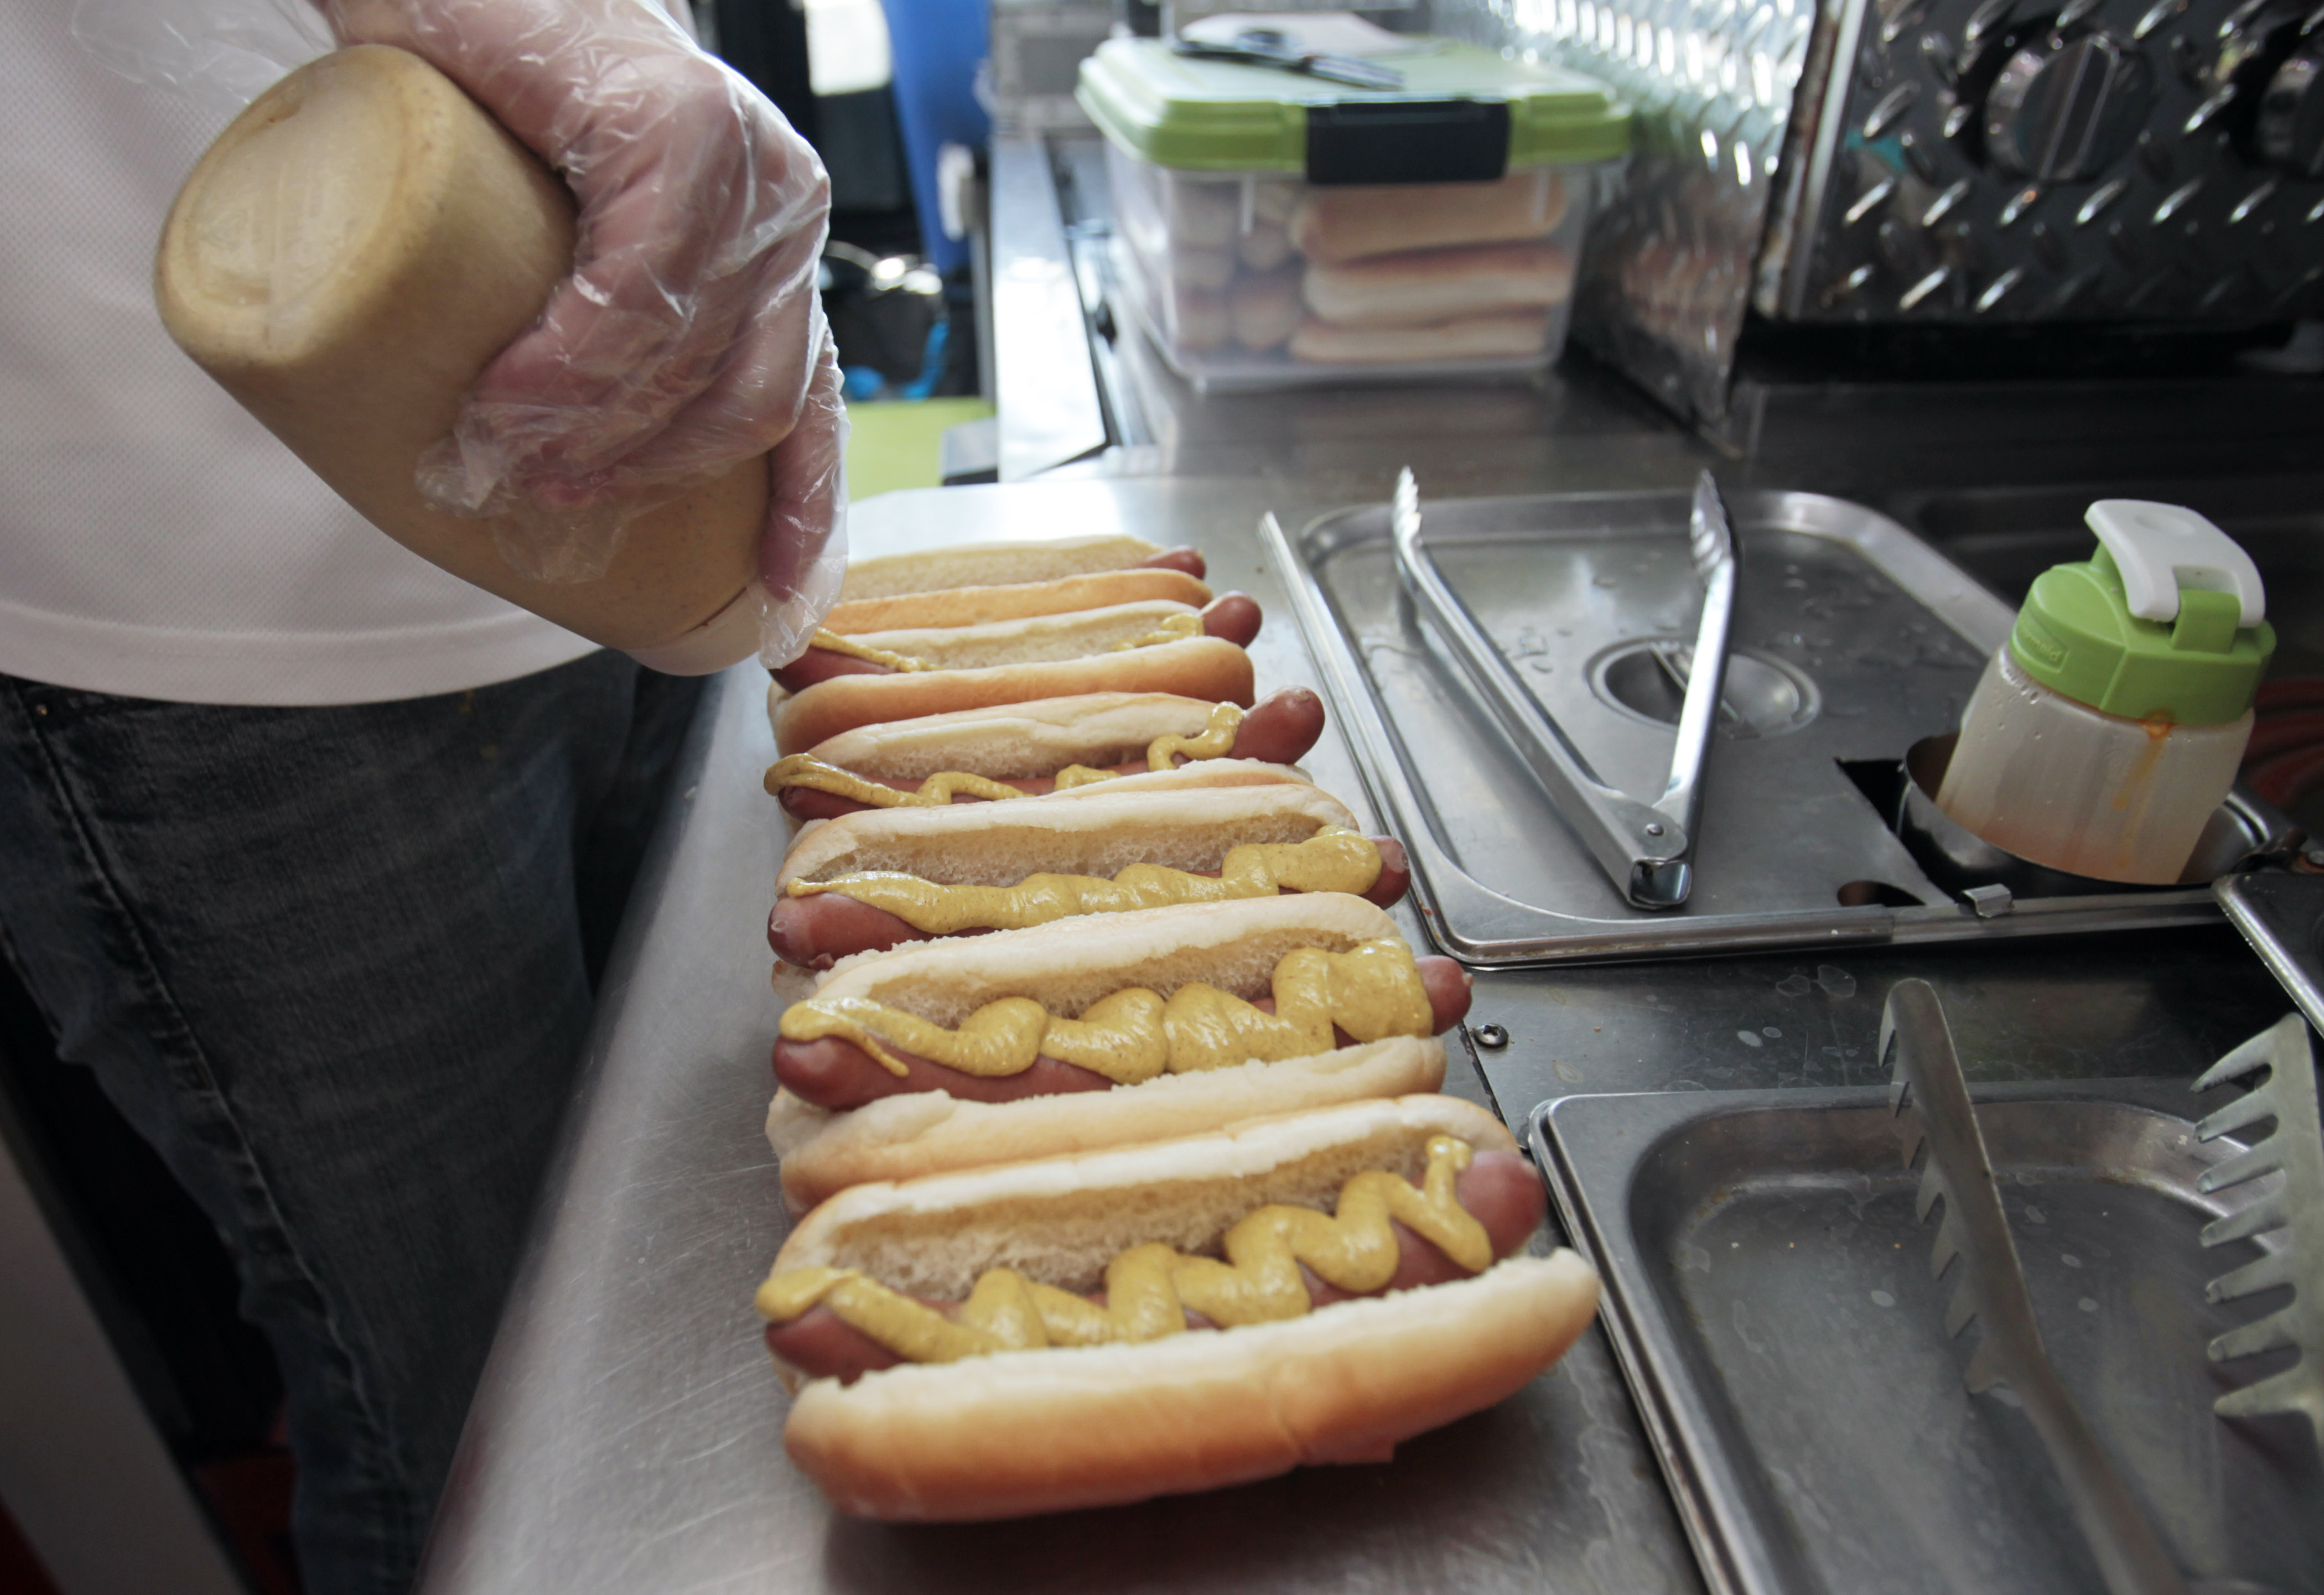 Where to Get Hot Dogs in Northern New Jersey - Montclair Girl